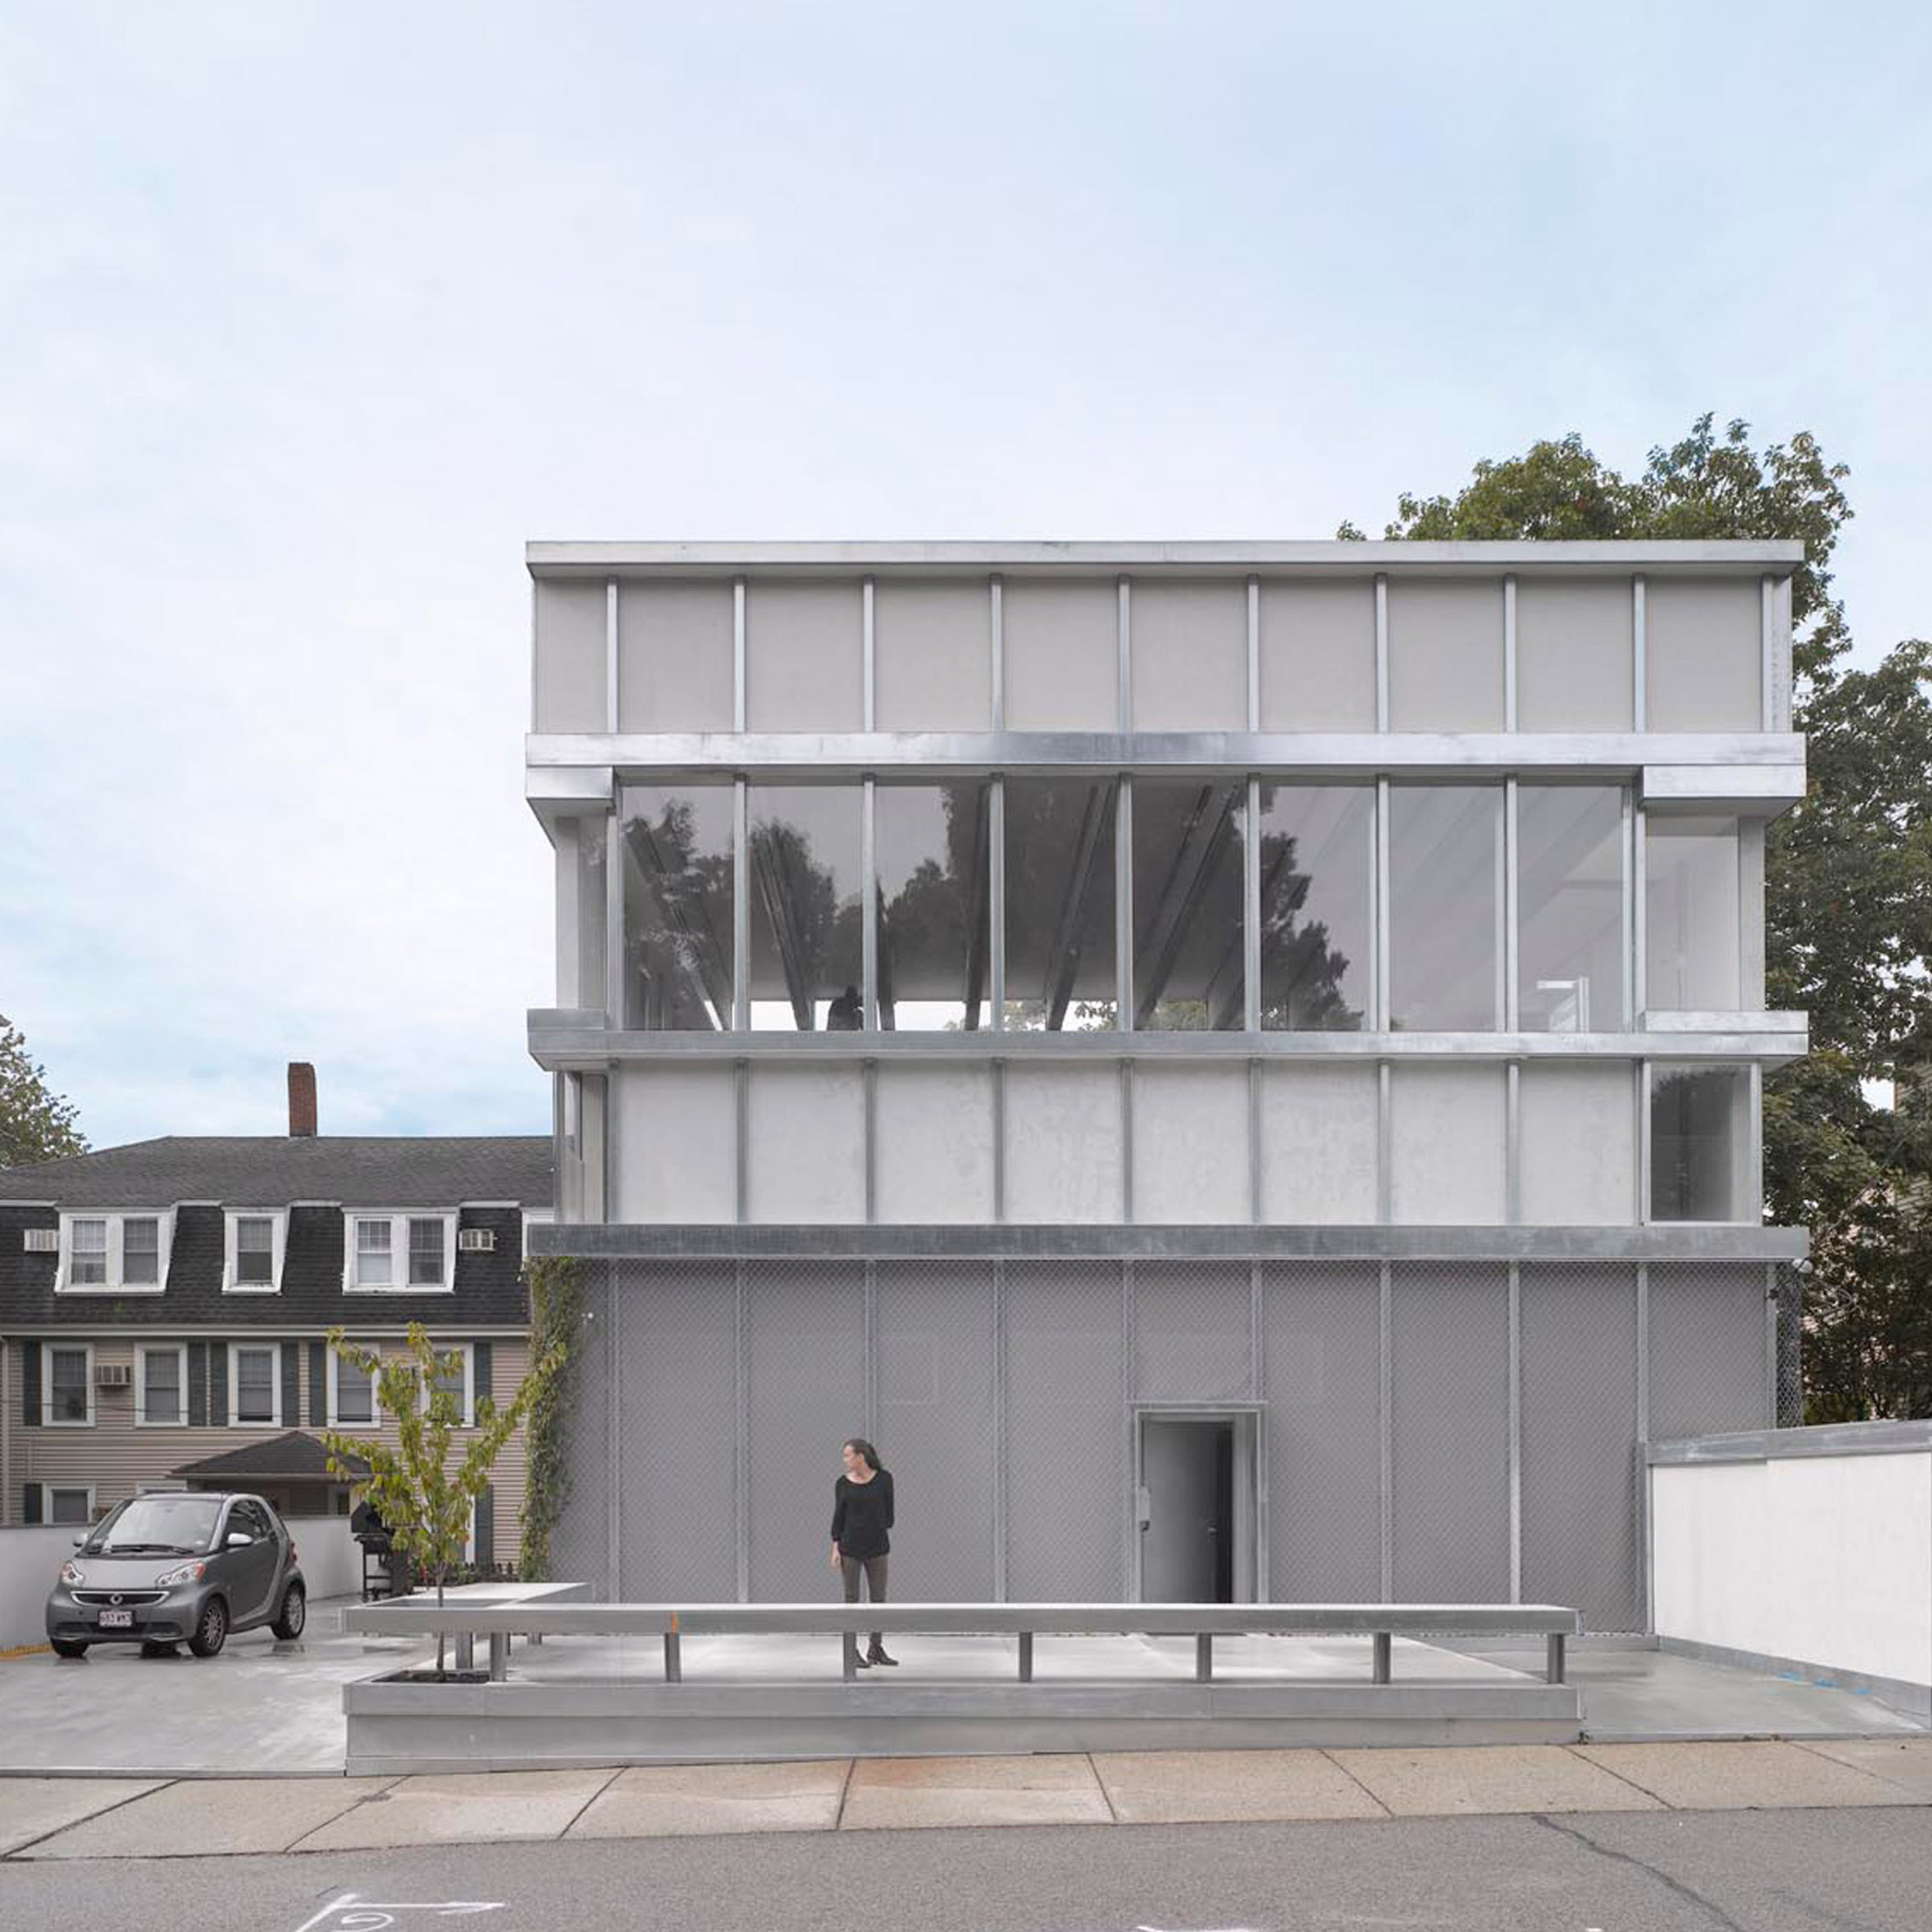 Parking garage extension forms home for architects Ensamble-0